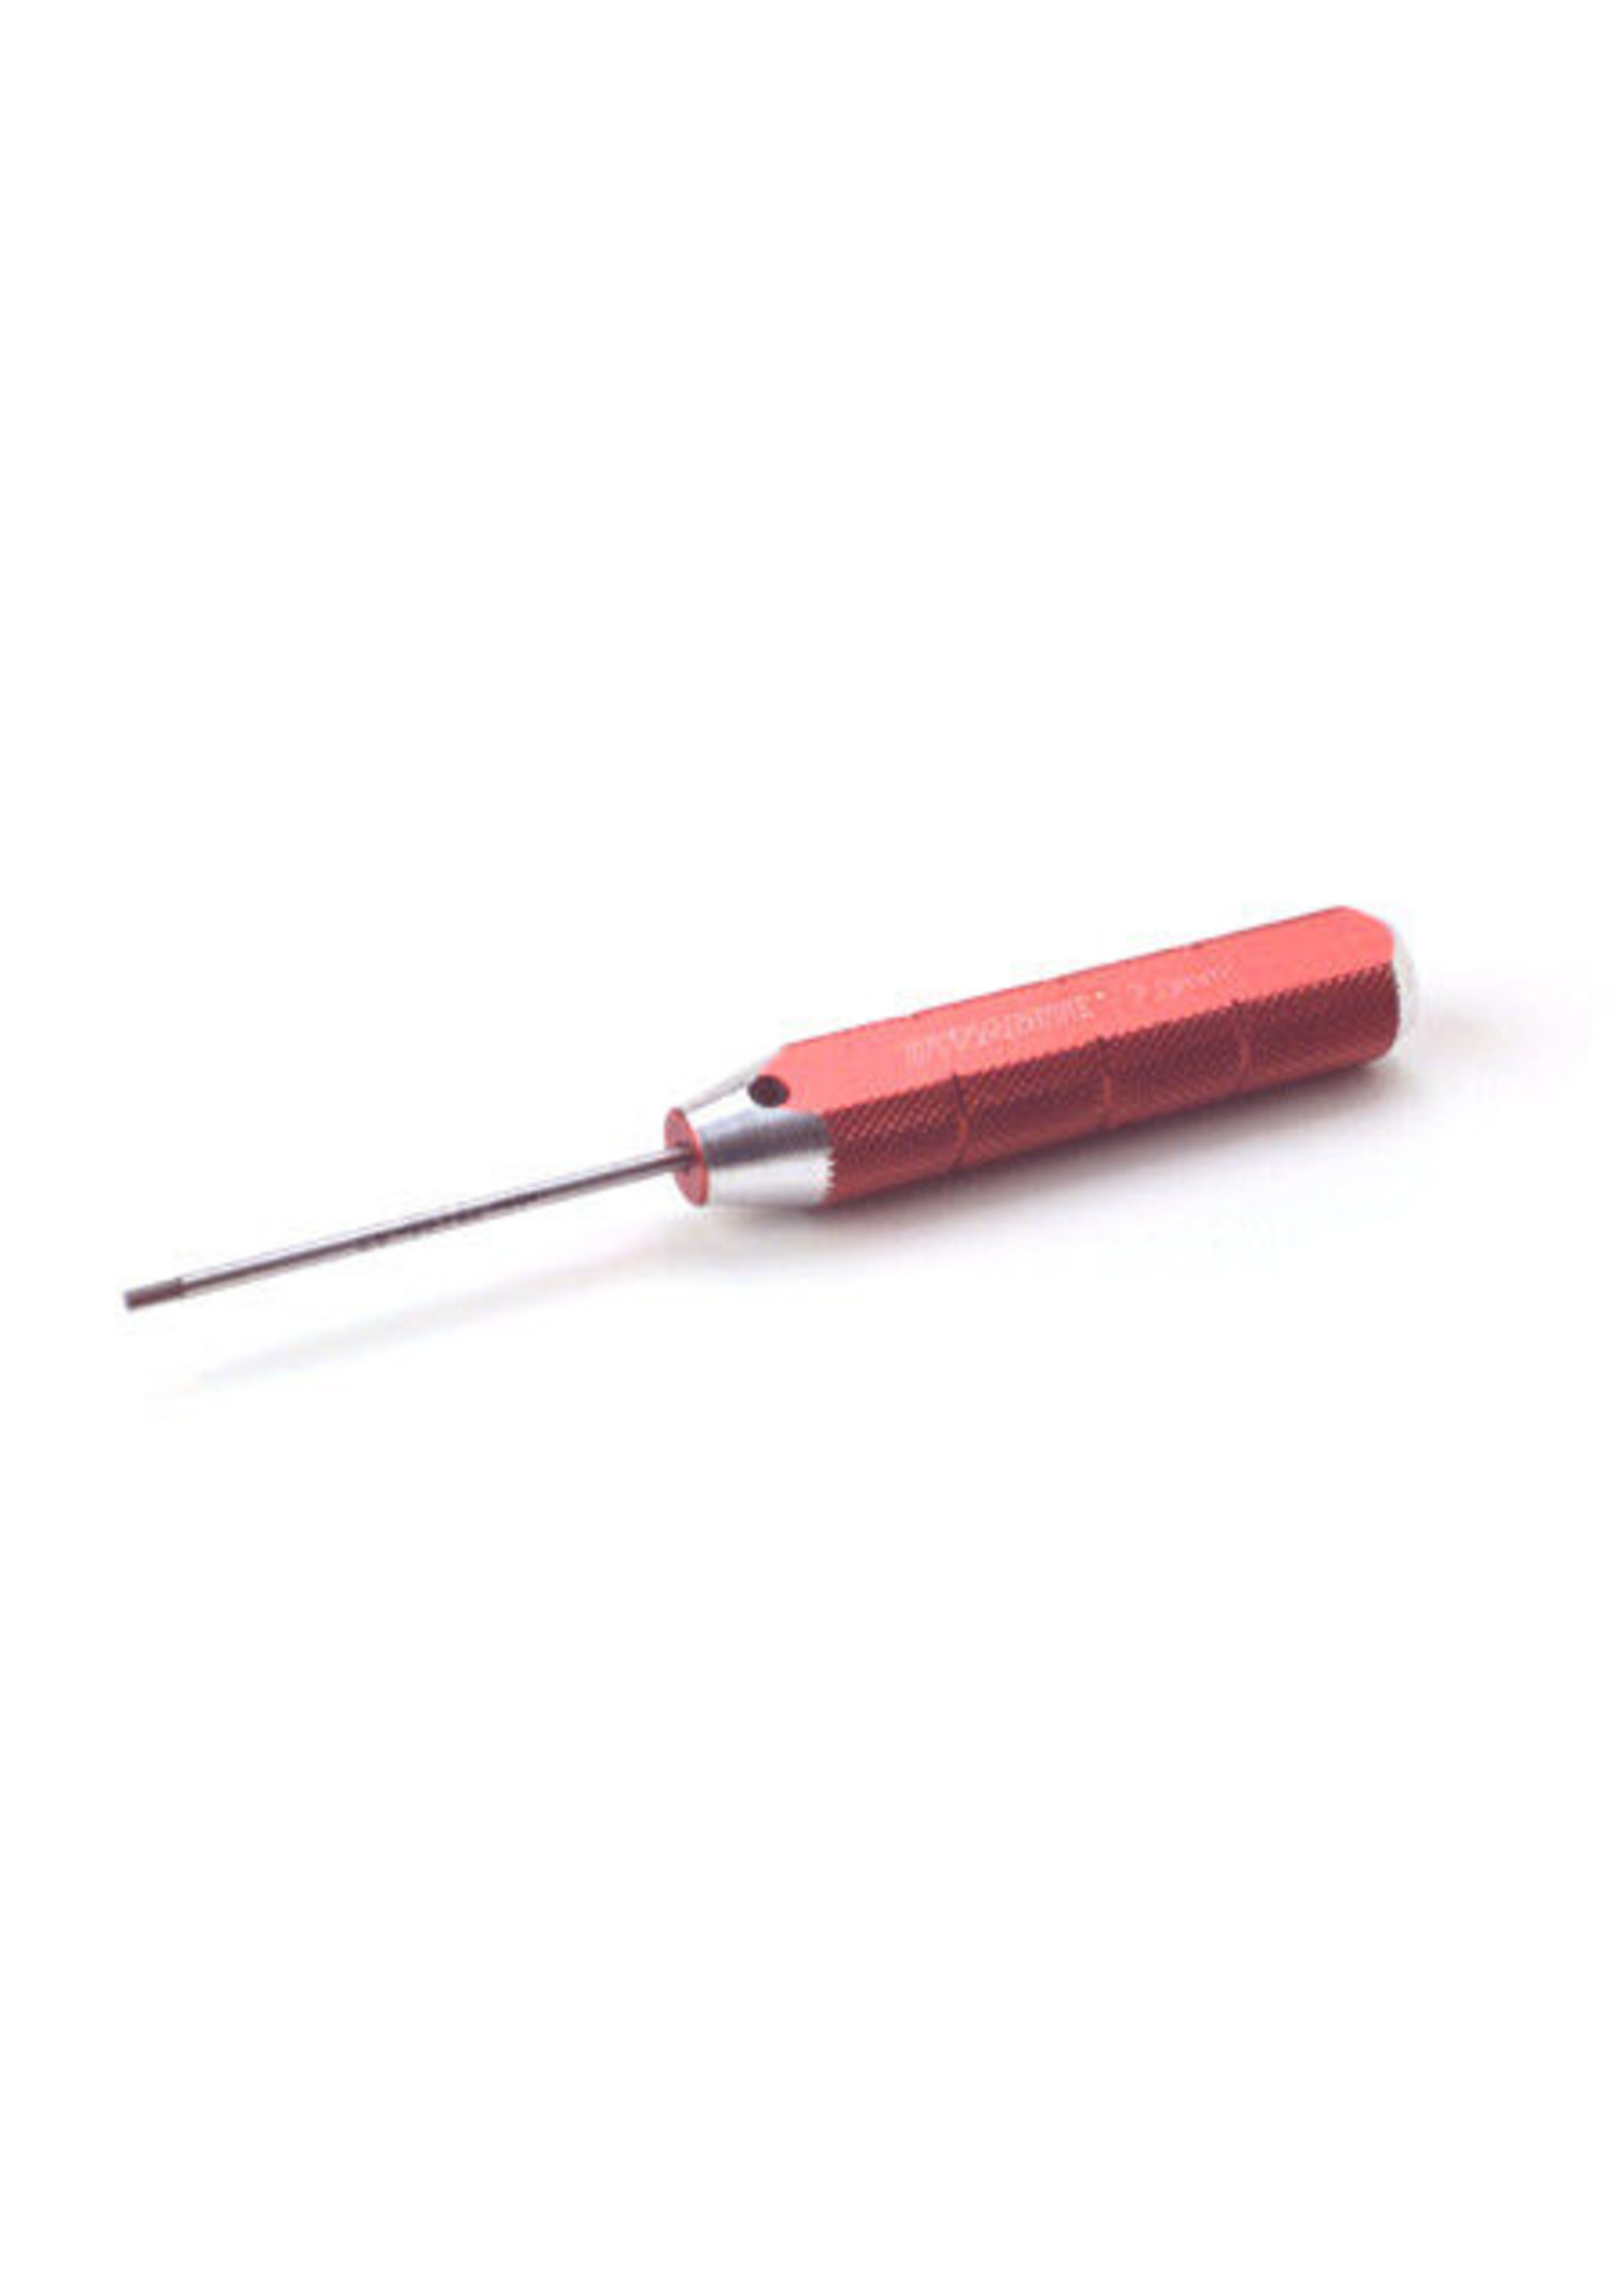 Dynamite DYN2901 - Machined Hex Driver, Red: 2.0mm